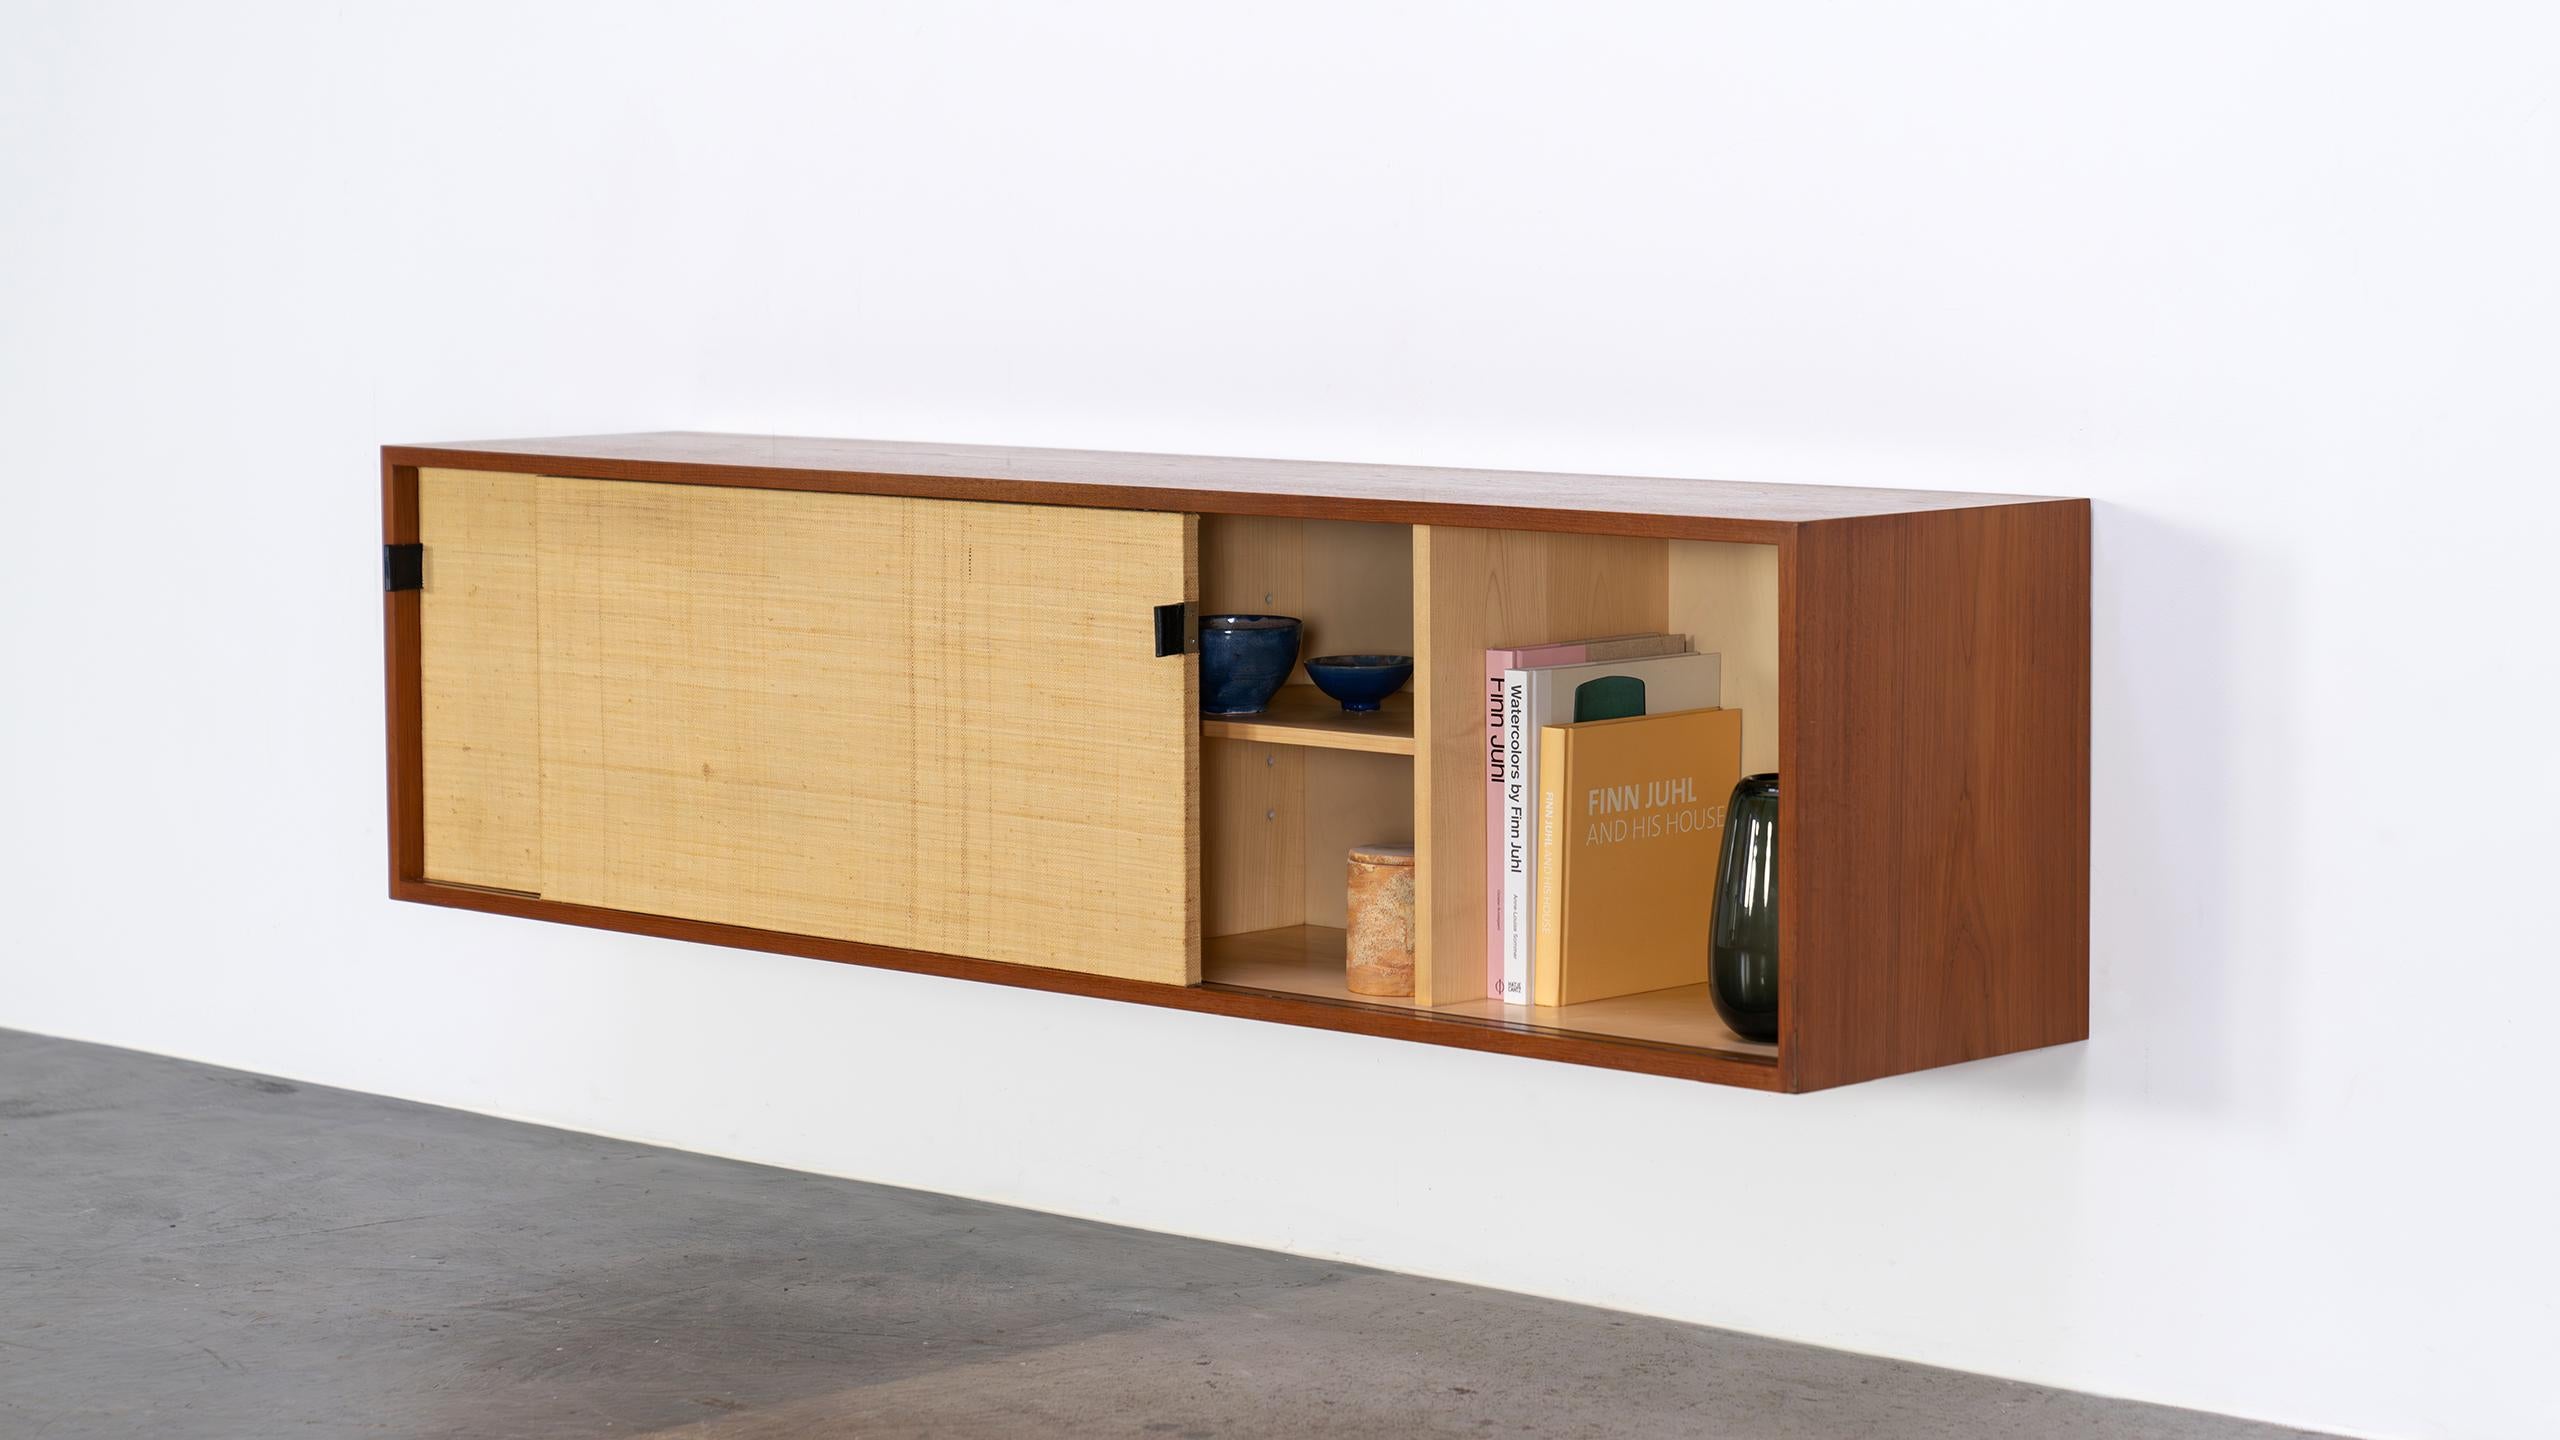 Extremely rare wall-hung sideboard (Mod°123) from 1952, designed by Florence Knoll for Knoll International - this version was produced in 1952 in a small edition by Knoll in Stuttgart.

The sliding doors are woven with seagrass, a beautiful, warm